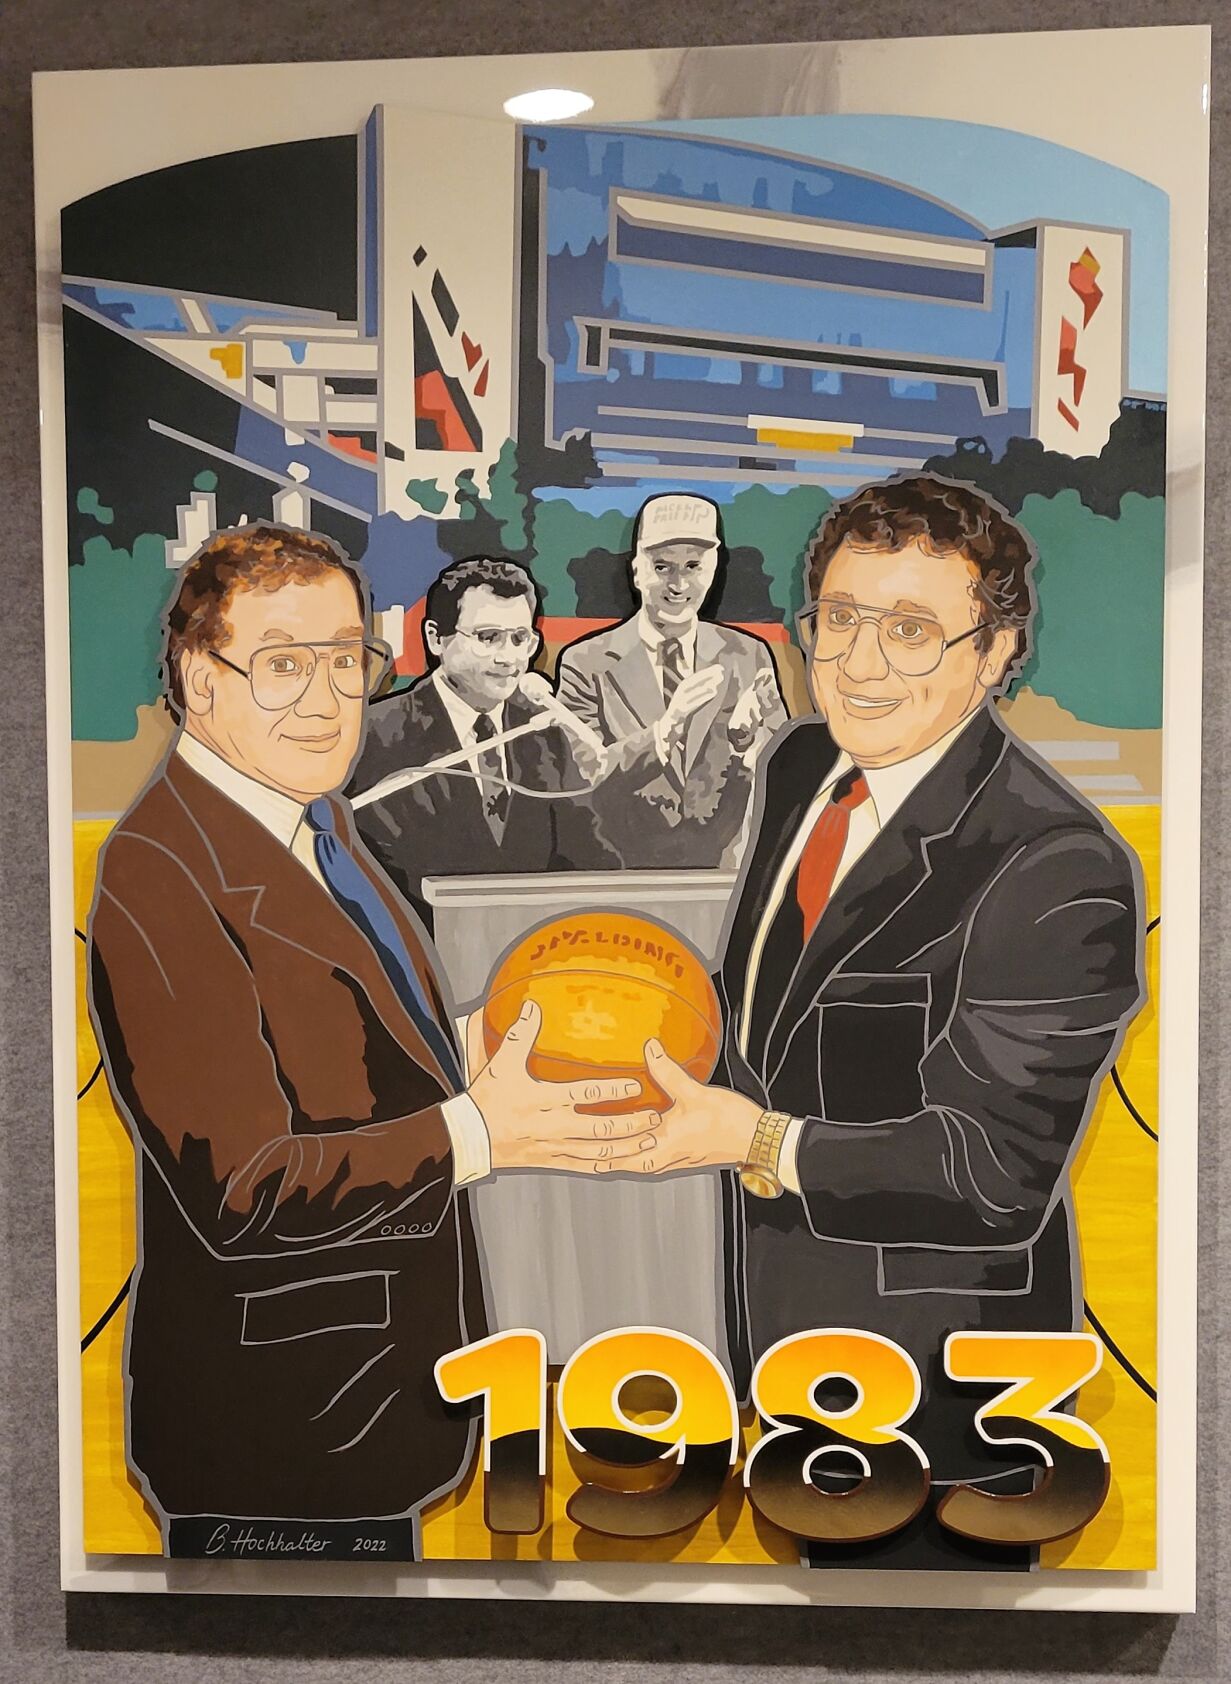 Mural of Slick Leonards rescue of Pacers has hometown touch News Columns tribstar picture